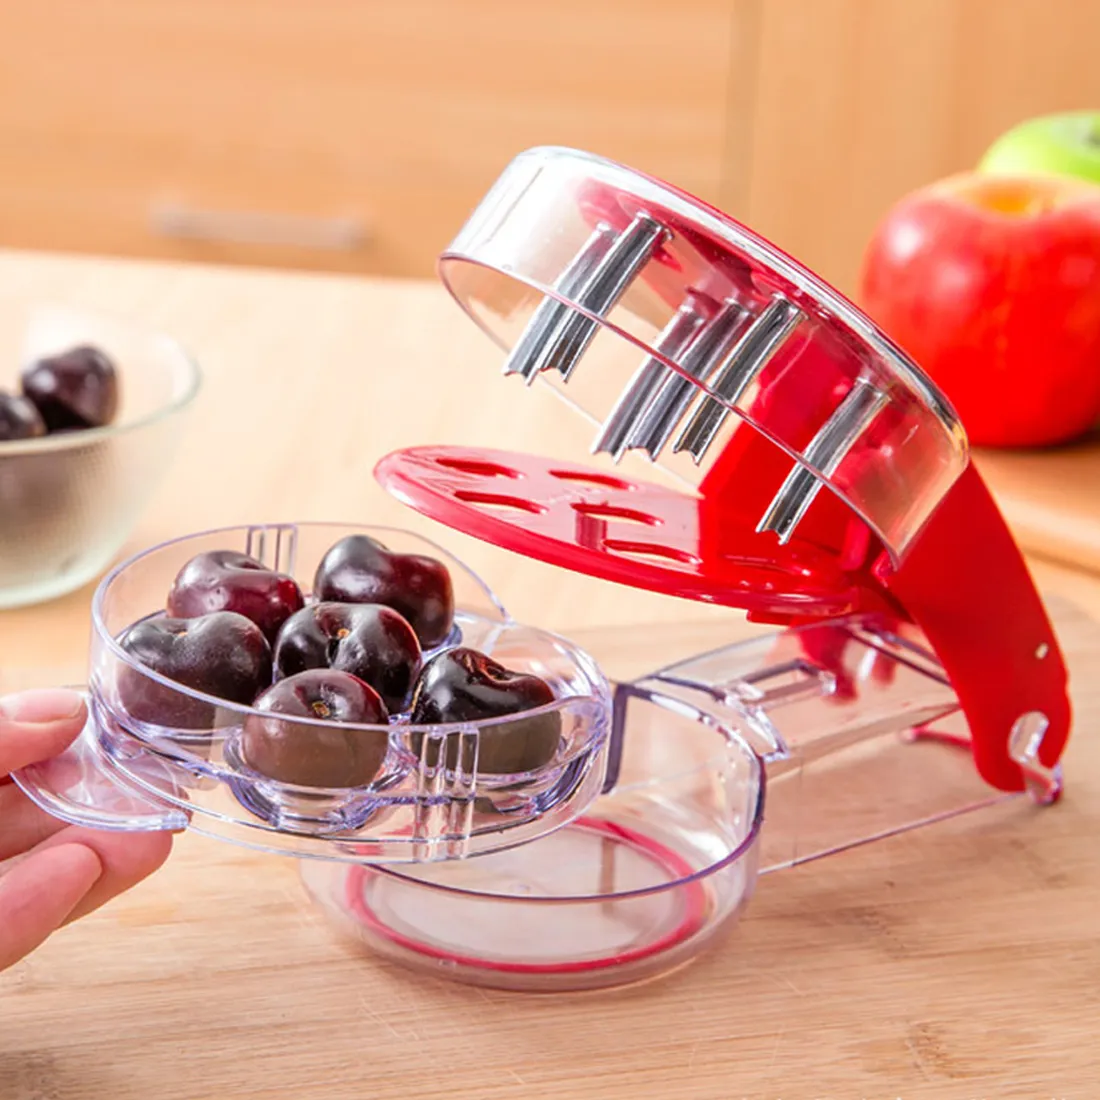 Top Cherry Olive Pits Seed Cherrys Fast Enucleate Removal Bone Kitchen Gadget Fruit Tool accessoires de cuisine 210319